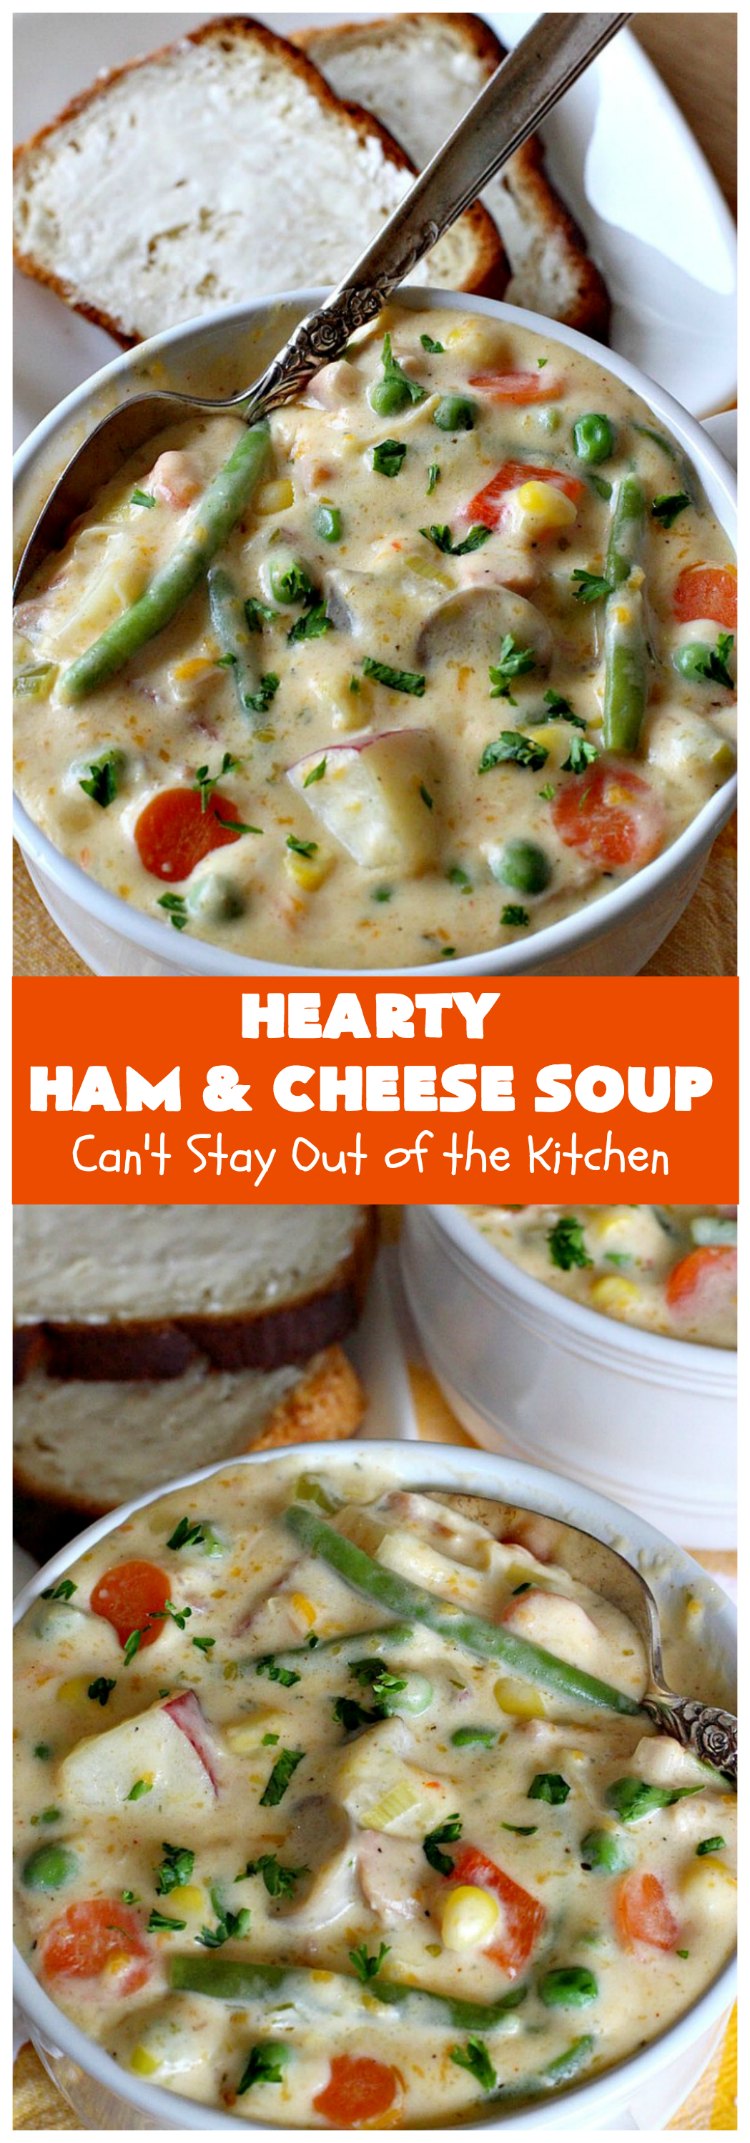 Hearty Ham and Cheese Soup | Can't Stay Out of the Kitchen